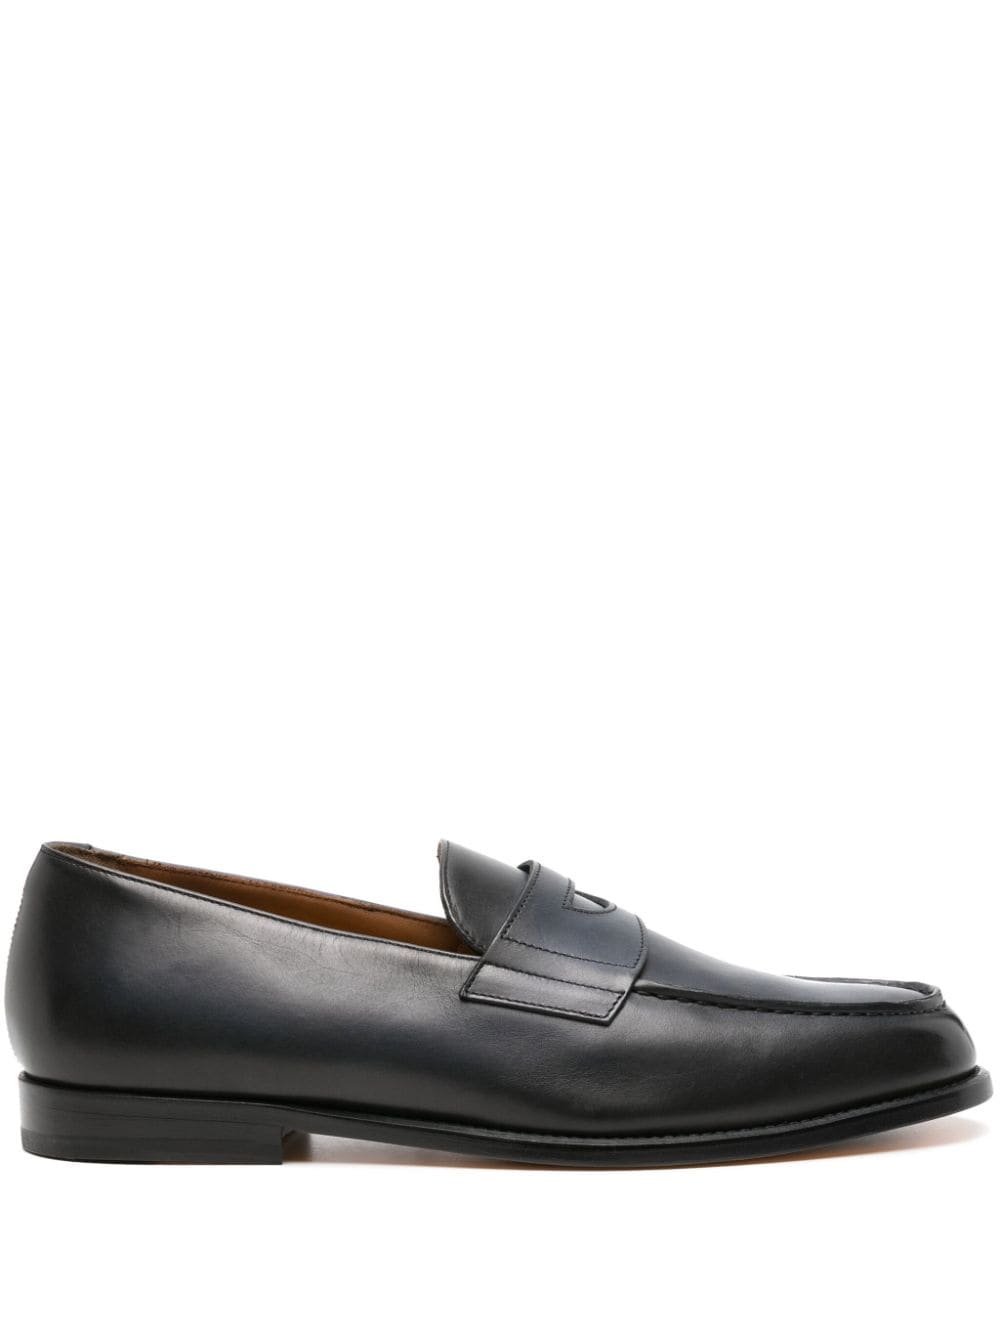 Doucal's faded leather penny loafers - Blue von Doucal's